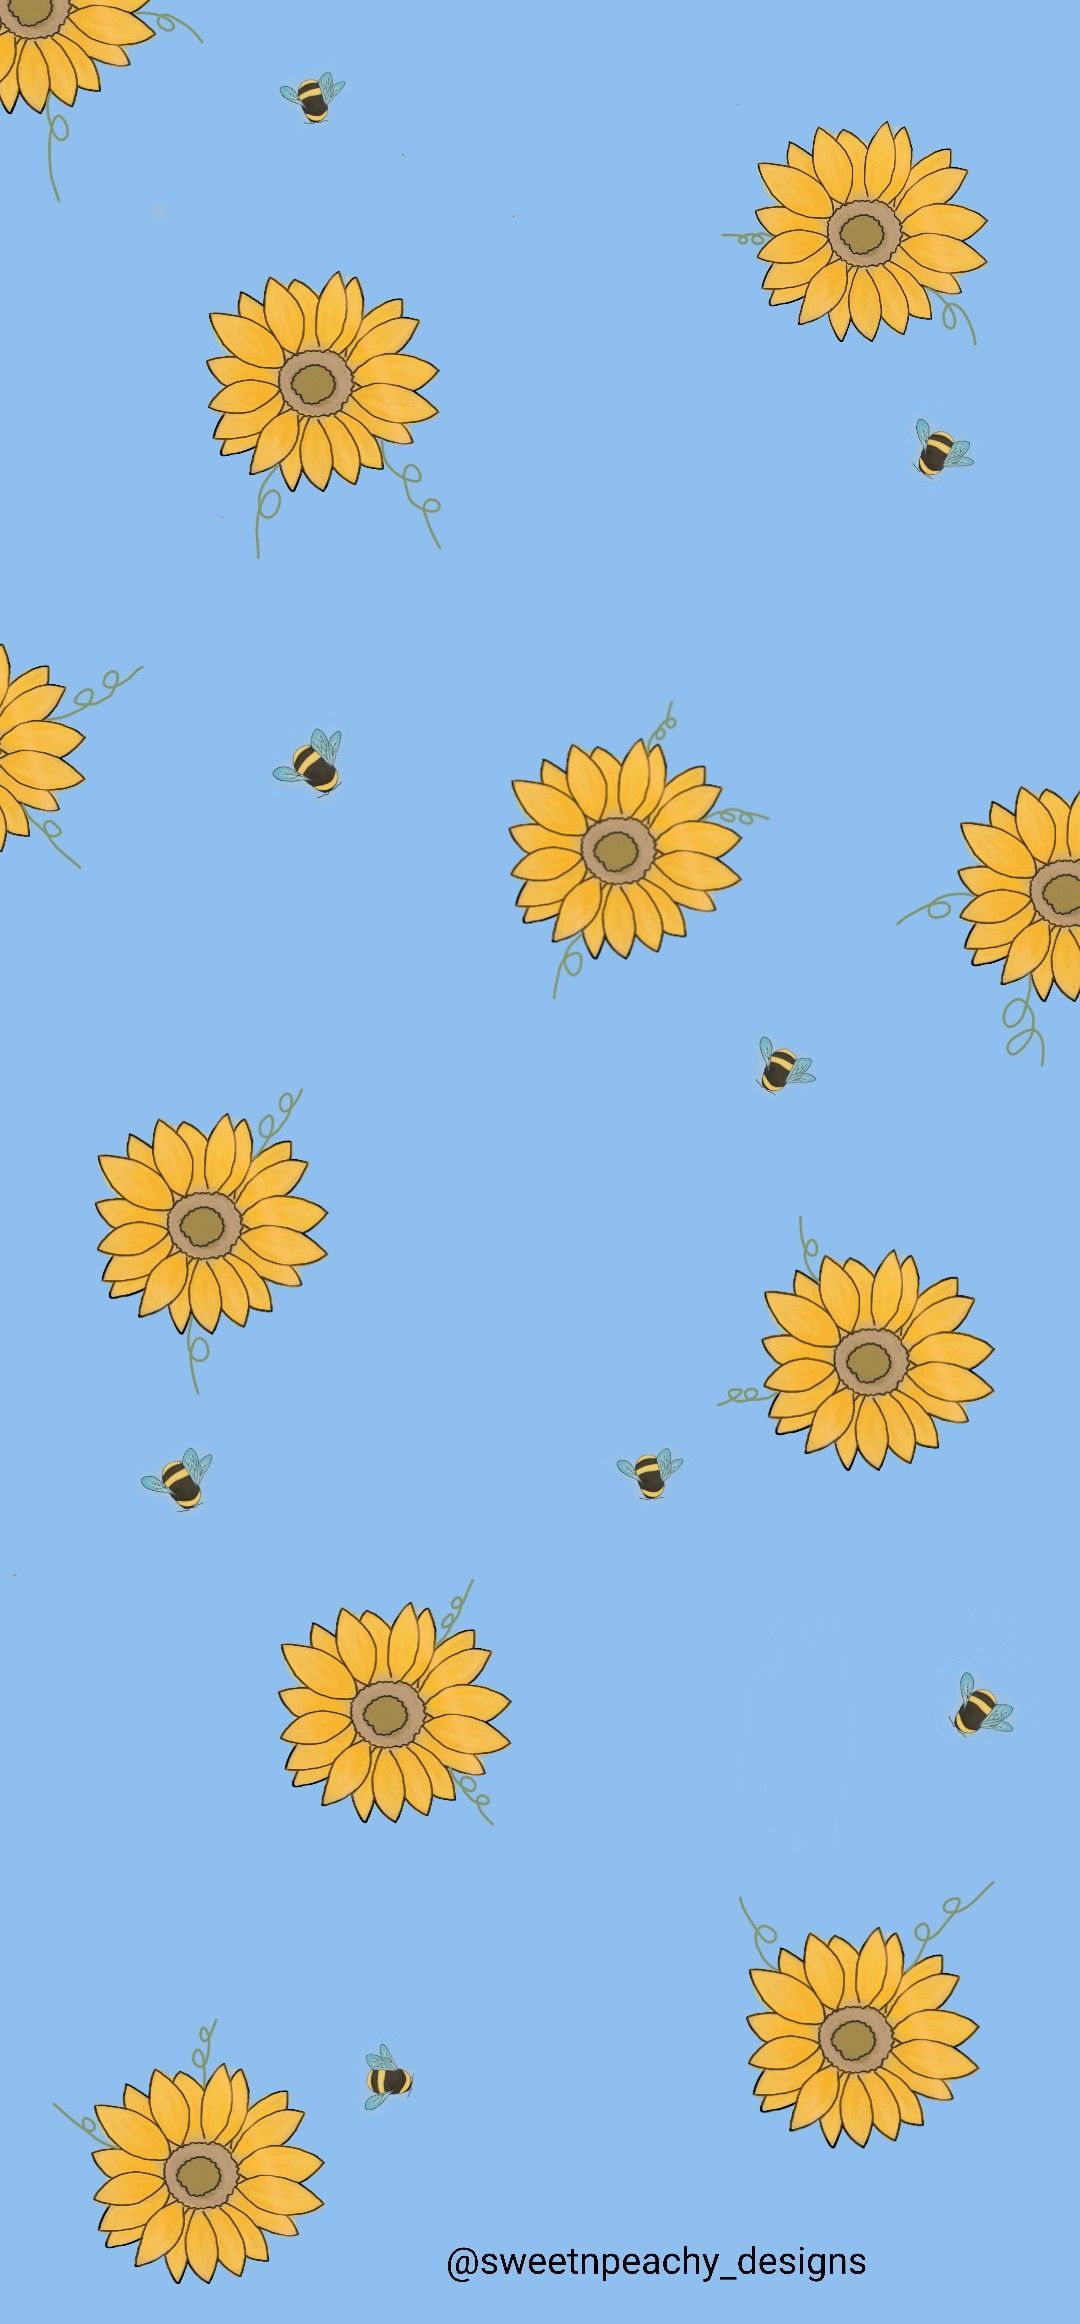 Sunflower and bees phone wallpaper. Phone wallpaper, Nature wallpaper, Sunflower